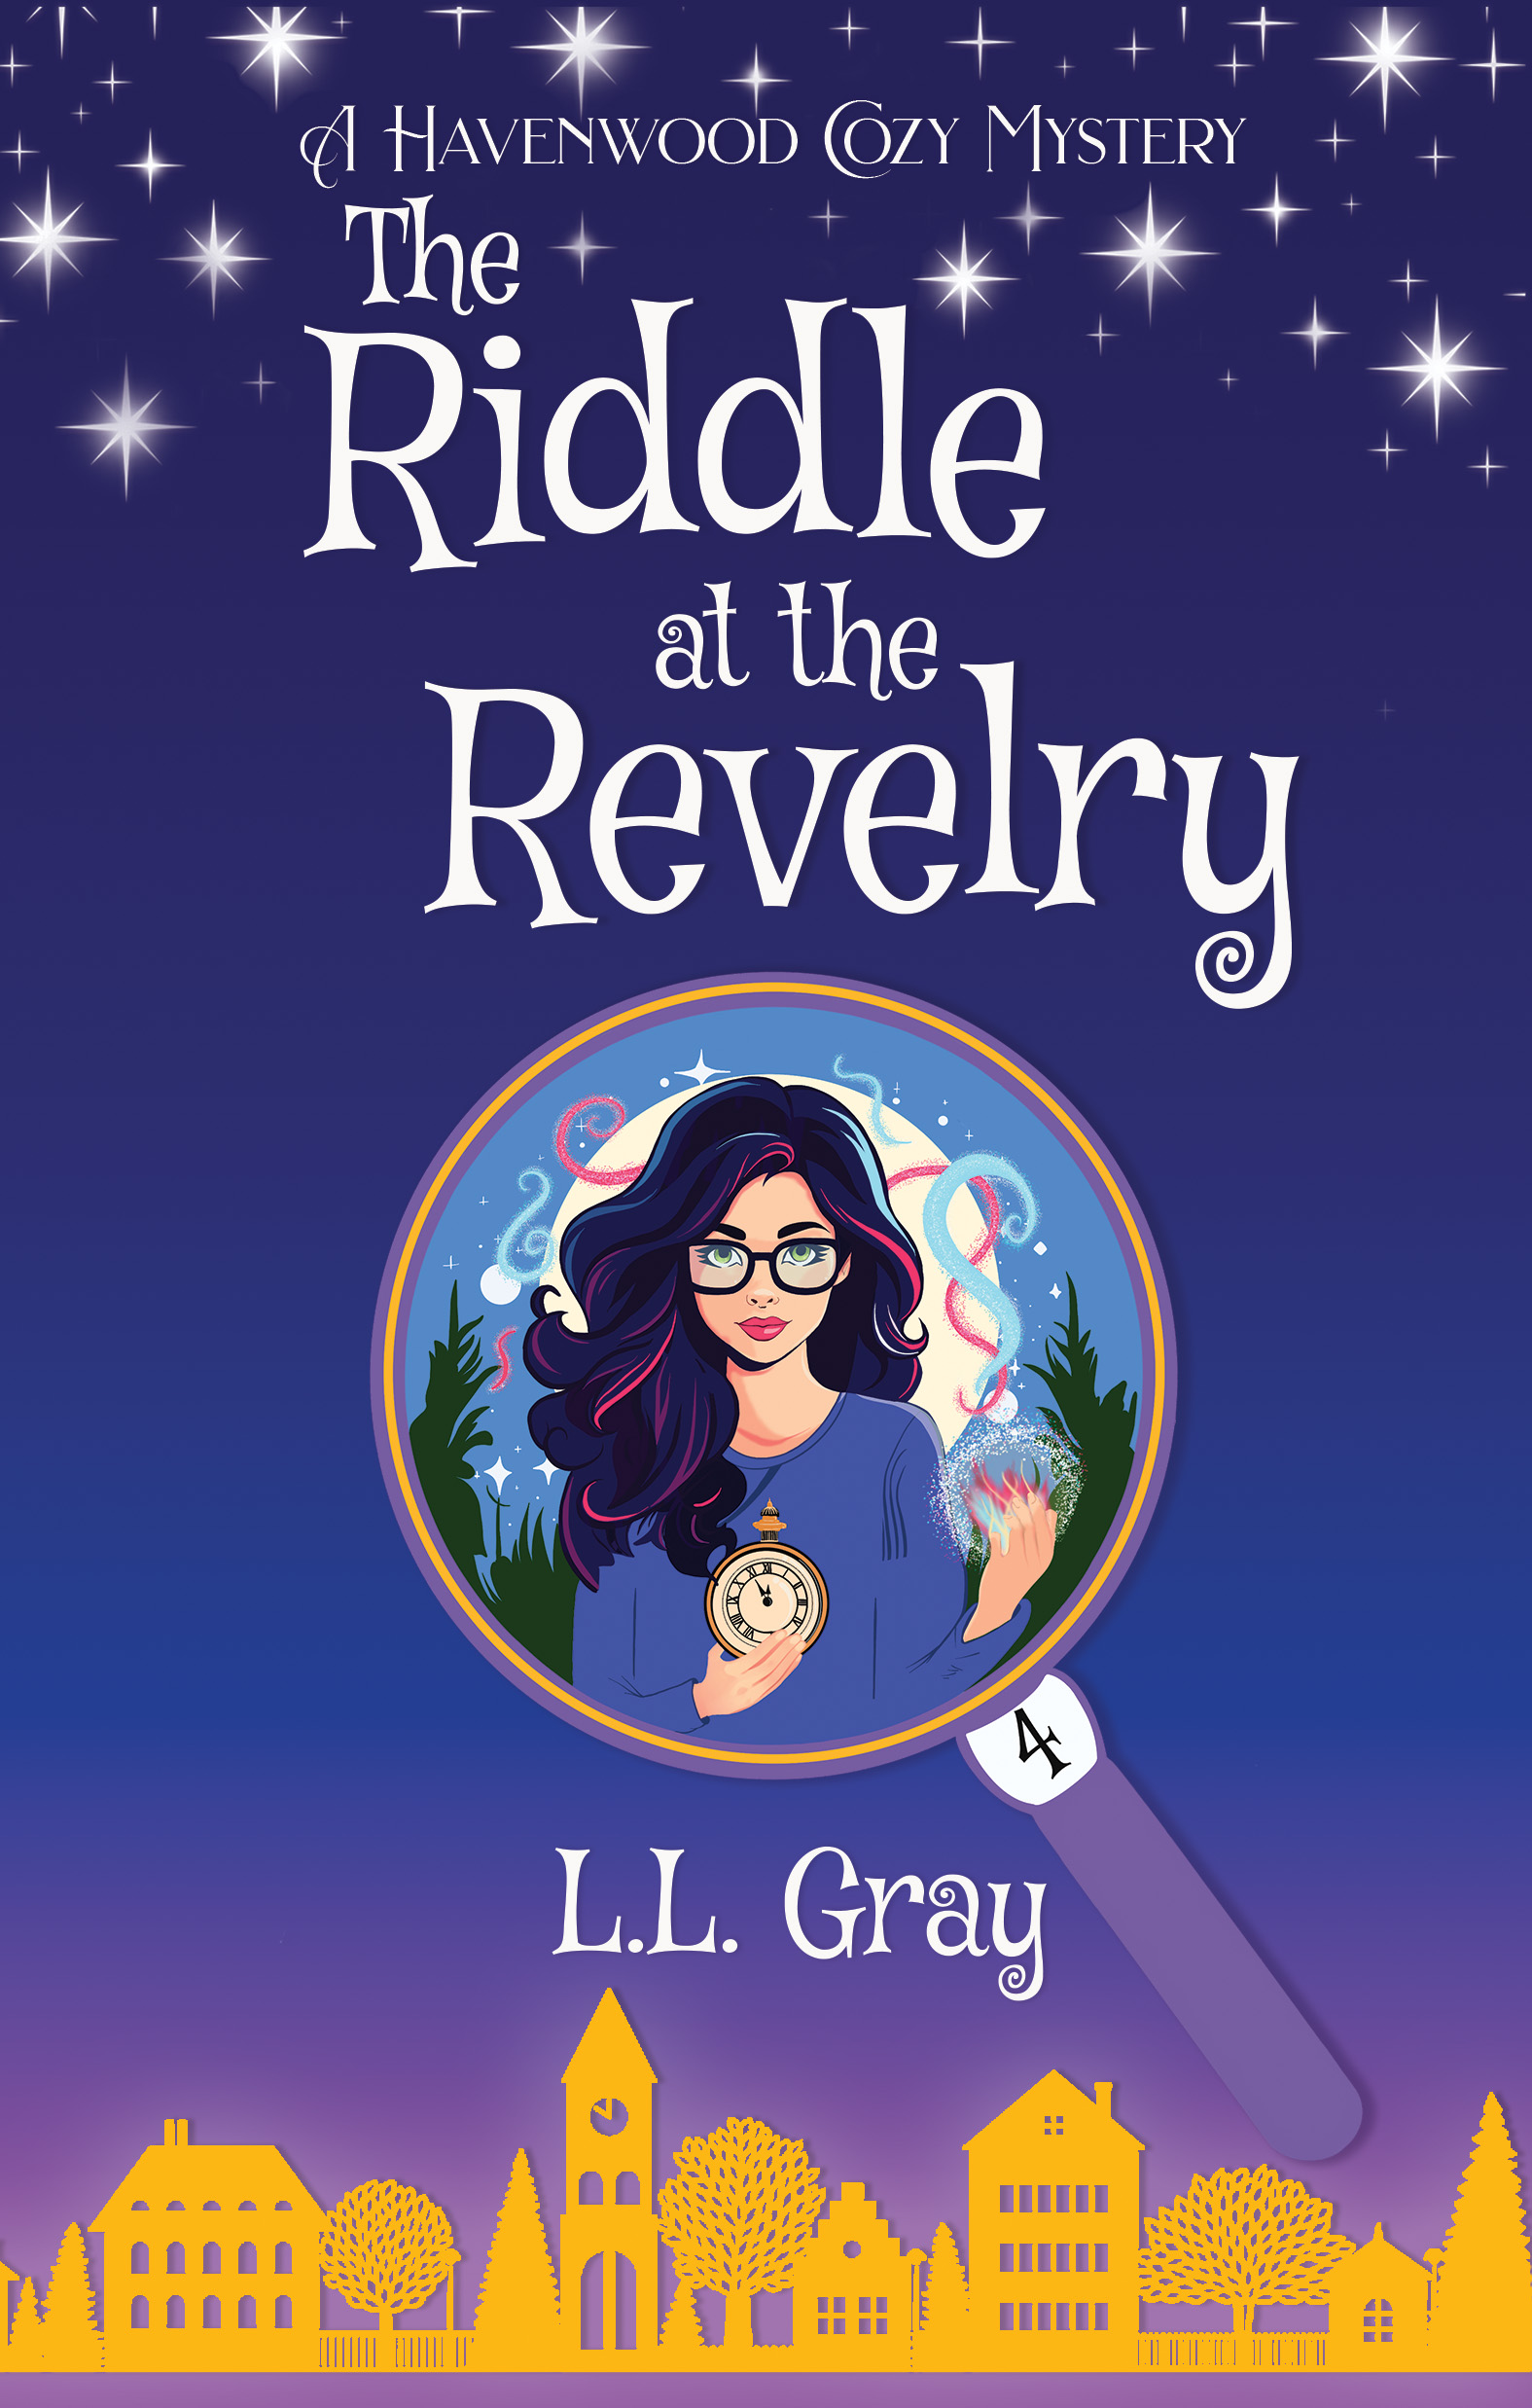 The Riddle at the Revelry